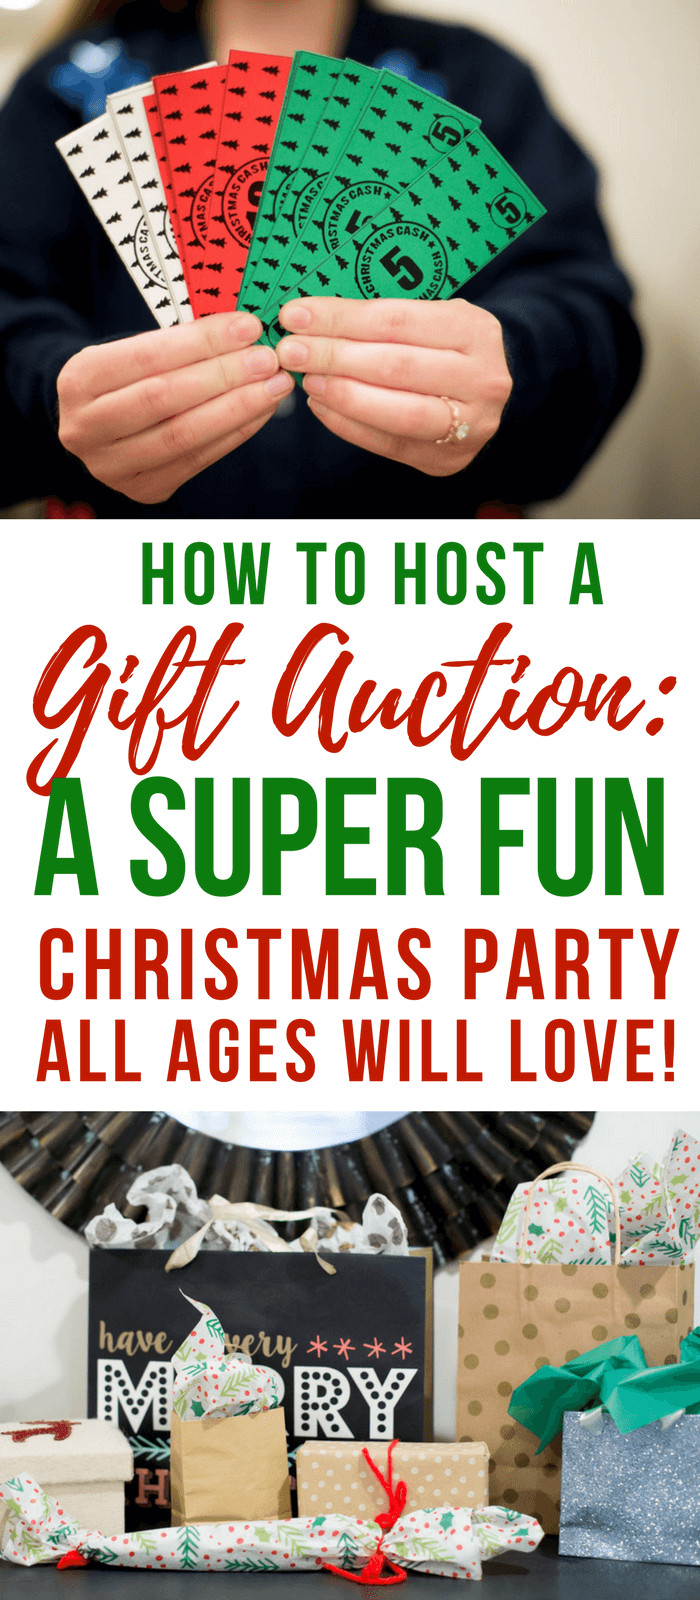 Holiday Party Game Ideas For Work
 How to Do A Christmas Party Gift Auction White Elephant